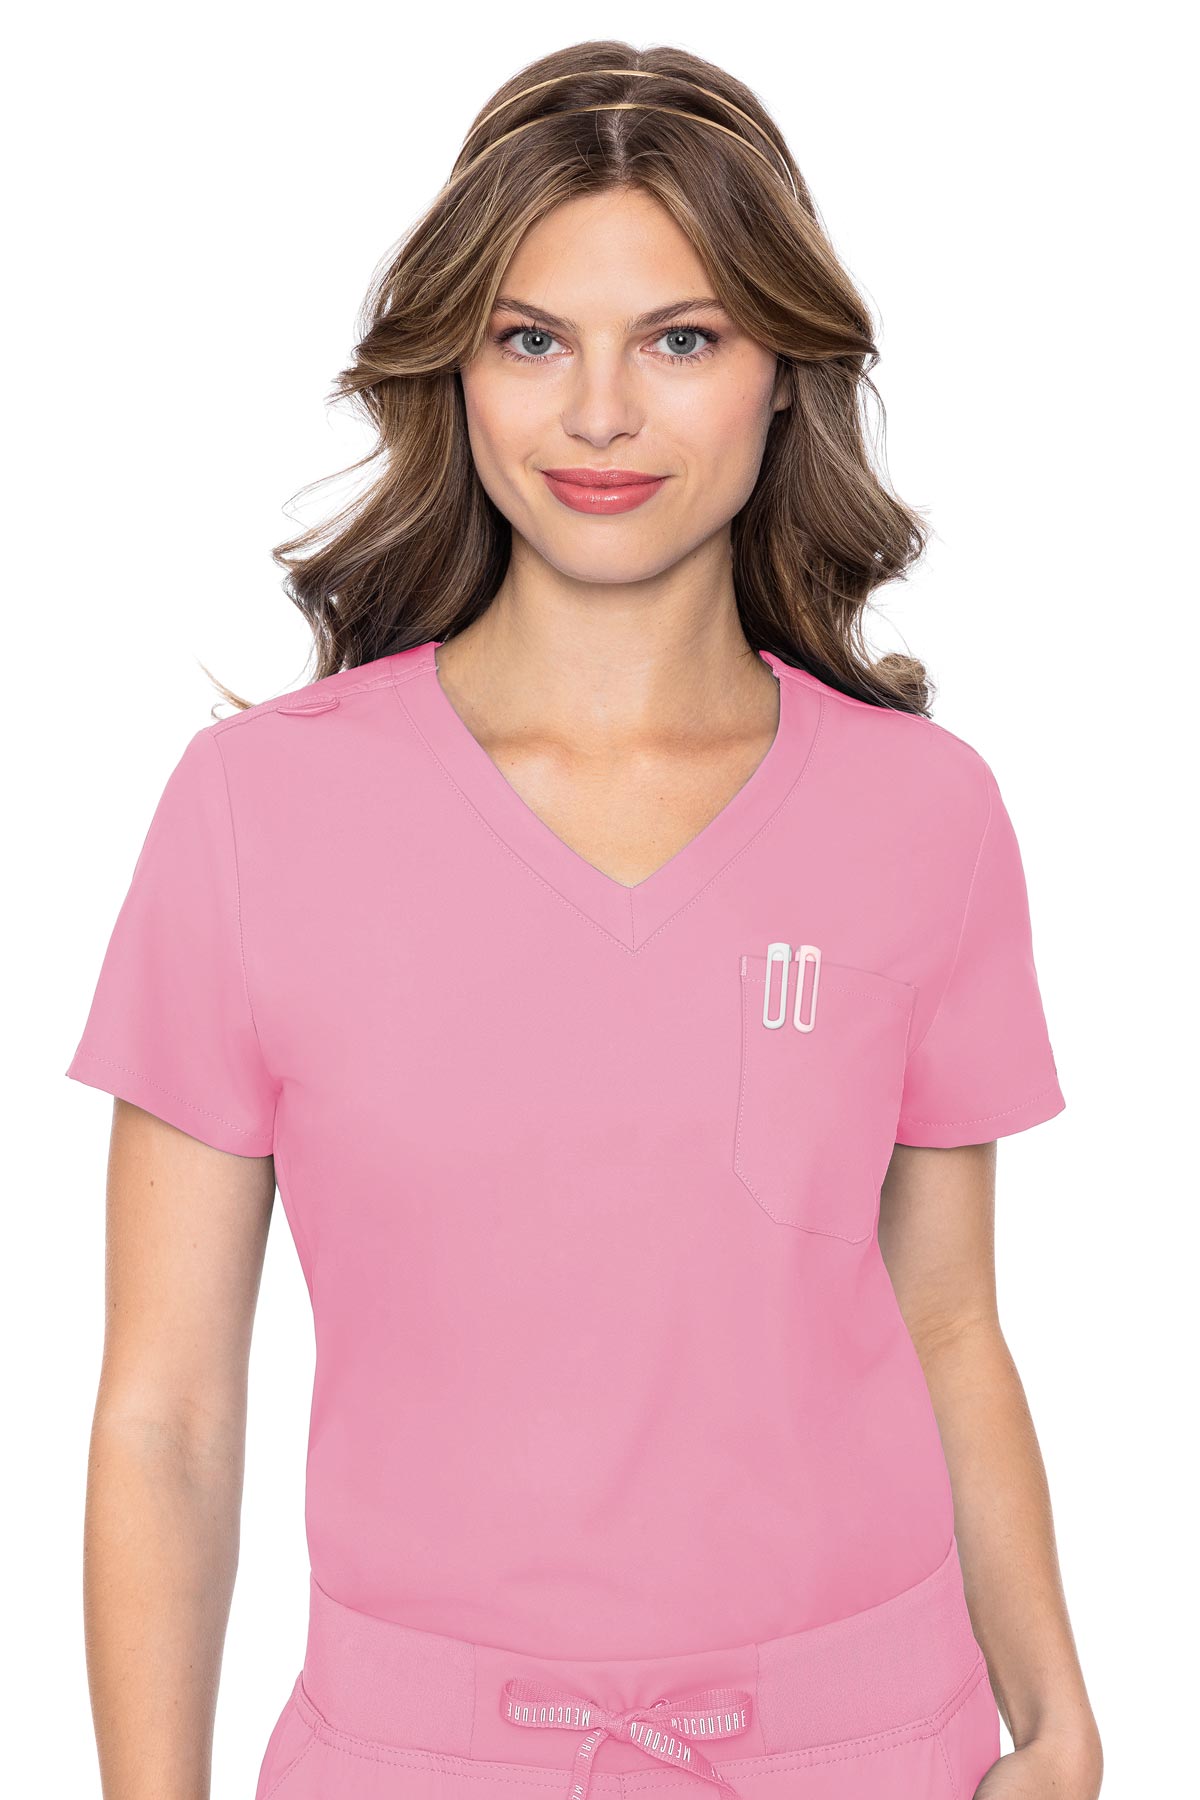 Med Couture Taffy Pink TOP